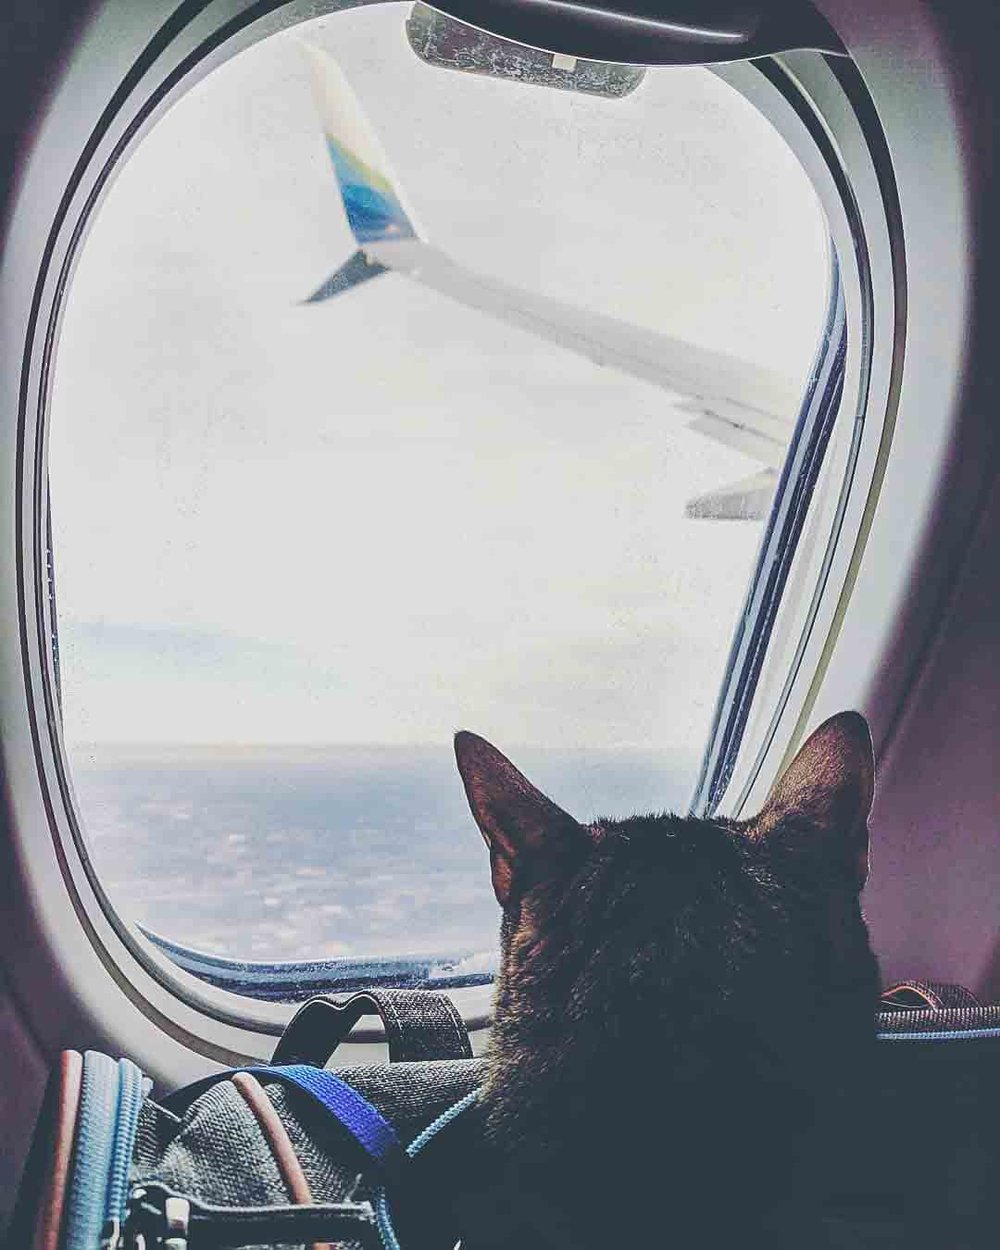 flying with a cat dogs on planes dog flying plane cat on plane airlines that fly dogs dogs on airplanes pets on planes traveling with a cat on a plane traveling with a dog on a plane pet airlines cat airplane taking a dog on a plane pet travel airlines pet flight cost flying on a plane pets on airplanes taking a cat on a plane cat flight tips for flying with a cat taking your dog on a plane taking pets on a plane tips for flying with a dog cat flying on plane flying with a kitten airplane travel with dog flying kittens airlines that take dogs taking my dog on a plane dog travel in flight flying with your cat cost to fly a cat cat airlines flying with my cat taking pets on flights dog flying airplane cost to take dog on plane dogs that can travel on planes taking dog on airplane dog on plane cost dog on airplane cost cat on the plane taking cat on airplane flying with a dog plane flights flying cat plane flying airplane flying flying plane flying with pets find a flight pet flights flight plane travel by plane dog airline carrier pet carrier for plane travel with pets airline pet carrier flight travel dog flight airplane travel flying with your dog fly flight fly airplane with your dog dog carrier for plane cost to fly a dog airline pet carrier dimensions plane fly dog flight cost get on the plane cost of flight dog carrier for airplane my pet fly airline cat carrier cat carrier for plane your flight pet carrier for airplane dog flight carrier cat carrier for airplane dog airline flying with my dog flight tips airlines that fly pets airplane pet carrier flight pet carrier airline travel with dogs get flights fly my pet cat flight carrier plane tips requirements for airplane travel flying with your pet make plane airline pet carrier requirements flying in an airplane airplane cat carrier airplane in flight paws on a plane airplane tips airline cat carrier requirements the plane flies pet carrier dimensions fly for cats make a flight requirements for dogs to fly to fly a plane requirements for plane travel pet requirements to fly airplane travel tips flights to can dogs that can fly on planes a flying airplane airlines to fly get plane flight to flight cat flight cost dog carrier for airplane travel travel with a cat airplane pet travel flights find airline flights do dogs fly dogs that fly airline cat carrier dimensions to get on a plane i fly planes airline requirements for dogs dog carrier for flying pet travel in flight which airlines fly pets plane travel requirements requirements to get on a plane traveling with your dog on a plane requirements to fly on a plane airlines and pets cat carrier for flying pets that fly cost to fly a cat on a plane requirements for pets to fly pet traveling on plane pet carrier for flying get a plane taking dog on flight take flights pets that can travel with you which airlines fly dogs flight you travel with dog in flight travel with airplane pets that can fly pet travel cost cat airline travel requirements to travel with a dog pets by plane dog flight requirements airlines that take pets cat can fly fly the airplane travelling by flight tip flights traveling with a cat on a plane cat on plane taking a cat on a plane your flight cat flight cat flying on plane taking pets on a plane flying with your cat cat airlines take flights flying with my cat taking pets on flights cat on the plane cat airline travel airlines that take pets what can i bring on a plane what can you take on a plane what can you bring on a plane what can i take on a plane plane flight what can you carry on a plane what can i carry on a plane can you take a cat on a plane can you bring a cat on a plane take a plane fly plane can i take my cat on a plane can cats fly on planes can i bring my cat on a plane what can i bring in my carry on what to bring on a plane how to travel with a cat on a plane what can you bring in a carry on what can i take in my carry on how to take a cat on a plane american airlines check my flight can we take pets in flight can you bring pets on a plane how to bring a cat on a plane can cats travel on planes what to bring in a carry on can you take pets on a plane how to bring cat on plane can i bring a cat on a plane what can you take on a carry on what to take on a plane bringing cat on plane can i take a cat on a plane what can i have in my carry on can you take your cat on a plane how to carry pets in flight how to take pets in flight what can you bring in your carry on what can i bring in a carry on can you bring your cat on a plane what to bring on a flight check in to my american airlines flight how to take cat on plane what can you bring on a plane 2021 can you bring cans on a plane in the flight or on the flight what can you have in your carry on american airlines cat bringing a cat on a plane what can you take in your carry on check plane how to travel with a cat by plane what to carry on a plane what can i take on a carry on what to bring in your carry on flying with a cat american airlines can you take animals on a plane how to fly with your cat how to travel with cat on plane can you bring animals on a plane can you bring cash on a plane can i bring cat on plane what to bring on carry on how to take your cat on a plane what can we take on a plane can i travel with my cat on a plane how to bring your cat on a plane can you carry cash on a plane carry on plane what can i bring on carry on can i take my pet in flight can you travel with a cat on a plane how can i take my cat on a plane can we carry pets in flight your plane can we bring pets in flight how to bring pets on flights can you take your pet on a plane how to fly a cat on a plane can i bring my pet on a plane how to take cats on a plane how to take a flight can a cat fly on a plane can i take my pet on a plane can cat travel in plane what can i bring on a flight what can you take on a flight how to take my cat on a plane flight take up what can we bring on a plane can i carry my cat on a plane how to bring a pet on a plane can we take cats in flight how to take a pet on a plane can you fly with your cat can you take cash on a plane how to travel with your cat on a plane how do cats travel on planes can a cat travel on a plane can you fly a cat on a plane take your pet what can you bring on a flight can i bring cash on a plane can i take cat on a plane can you travel with cats on a plane can i take my cat on a flight carrying pets in flight can you take pets on flights what can i take on a flight what can you bring on a plane carry on where my flight can you carry pets on a plane how to bring pet on plane american airlines cat carry on bring pet on plane what can you bring as a carry on how to bring my cat on a plane can i carry cash on a plane can you bring your pet on a plane take a plane or take a flight what can you take with you on a plane can you take emotional support animals on planes can you fly cats on a plane can we take animals in flight taking animals on a plane can i travel with my pet in plane how to travel on a plane with a cat how to fly your cat on a plane how do i fly with my cat how to take a plane how to take cat in flight how to fly with my cat how do you take a cat on a plane american airlines what can i bring in my carry on how do you travel with a cat on a plane what can i take in carry on american airlines check in for my flight to take a plane take on plane can you carry a cat on a plane what can you take as a carry on taking your cat on a plane how can i bring my cat on the plane can you bring on a plane can you travel with your cat on a plane can you bring a cat on the plane how can i fly with my cat can i take my cat on the plane can i carry pet in flight taking my cat on a plane take my flight can i travel with a cat on a plane how can i travel with my cat on a plane can i fly my cat on a plane how to take my pet in flight bringing cash on a plane what can i bring on a plane carry on what to take in your carry on can i bring cats on a plane can we carry cat in flight what can you bring on your carry on what make up can you take on a plane airline cat on my flight how to bring your pet on a plane what is your plane can i bring my cat on the plane what can i bring on my flight can you bring cats on planes what can you bring carry on plane best airline for cats can you bring a carry on on american airlines what can take on a plane how to carry a pet in flight can i take cat on plane how to carry cat in flight american airlines fly with cat can i take pets on a plane what can i take on my flight can i take cash on a plane how do cats fly on planes flight take taking cats on flights how to get a cat on a plane can you take a cat on the plane how do i take my cat on a plane can we take pets on flight what can we carry in flight can i bring a pet on a plane how to take your pet on a plane take on flight can cats fly on american airlines how to check what plane your flying on on my flight or in my flight how to carry cash on a plane can you bring pet on plane flying with cats american airlines what can you take on a plane carry on take a flight or take a plane how to take pet on plane what can you bring with you on a plane can i take a pet on a plane american airlines travel with cat how to know what plane your flying on taking cat on flight how do i bring my cat on a plane can i bring pet on plane american airlines flying with a cat american airlines cat travel what make up can i take on a plane emotional support cat on plane what can i bring carry on what can carry on a plane what to bring for a flight what can i do on a plane how cash can you carry on a plane where is your flight best flights to take can you bring an animal on a plane what to bring in my carry on what to take on flight how to bring animals on a plane what to bring on a plane carry on take up flight how can i bring my pet on a plane how to fly cats on airlines what animals can you take on a plane what to bring for flight take your flight bringing animals on a plane what can you bring on plane carry on can i take a flight can you travel with cat what can bring on a plane can you bring an emotional support animal on a plane what can we carry on the plane is your flight bringing my cat on a plane what to bring to a flight can you take an animal on a plane bring pets on flight best airline to fly with cats what to bring carry on plane cats as carry on plane can cats travel in planes how to travel with a cat on plane what can you take from a plane what can i take on a plane carry on how to take a cat on the plane your airline what to take on carry on taking a cat on a flight taking your pet on a plane can you carry on a plane your carry on can i take pet on plane what can you take in carry on carry cat on plane how to fly a pet on a plane how to travel with your pet on a plane how to travel on plane with cat can i bring make up on a plane how do you bring pets on a plane how to bring an animal on a plane how to take an animal on a plane what can i carry on a flight how to take animals on a plane can you take pet on plane how can i take my pet in plane what to bring with you on a plane cat on a flight how to travel by plane with a cat can you take a pet on the plane traveling with my cat on a plane bringing your cat on a plane can cats fly on a plane how to travel with a cat plane what can you carry on your carry on what animals can you bring on a plane what airlines take pets get your flight what can i bring in the plane how to travel with cat in plane how to carry a cat on a plane what can you take as carry on what can you bring as carry on how do you take a pet on a plane what to bring when traveling on a plane how to bring a cat on american airlines what to bring on a carry on on a plane how to bring pets on a plane what can be in your carry on how to take animals in flight what we can take in flight find your plane how to travel with a cat in a plane cats and planes airlines that take cats what can you carry on a flight can you take a flight what to take on a carry on how to bring pets in flight what pets can you take on a plane can i bring pets on a plane carry pet on plane how to bring animal on plane bringing a cat on american airlines what can i fly with in my carry on how do you know what plane your flying on taking an animal on a plane pets you can take on a plane how do i fly my cat on an airline bring on a plane what pets can you bring on a plane traveling with a cat plane what can i take carry on a plane take up plane what to bring on my carry on airline what can you bring what can you take carry on a plane plane which airlines take pets where is your plane when your flight how to know which plane your flight is fly cats on airlines how to bring cash on a plane how can i take my pet on a plane what to bring in a plane animals you can take on a plane what can you bring on a plane with you make your flight carrying cash on a plane carrying animals on planes bring animal on plane how to get your pet on a plane how to take cats on plane about my flight what can you bring for carry on what to bring for carry on what can i travel with in my carry on how to take your pet on the plane what to take with you on a plane can cats travel by plane how to take a pet on a flight fly your plane how to take a pet in flight taking cash on a plane know your flight how to take your pet on an airline what can you take in the plane what can i carry on to a plane what i can bring on a carry on what can you take on plane carry on what can carry on plane with you what can you take on the plane in carry on taking an emotional support animal on a plane what to take for a flight traveling with a cat on plane carrying pets on a plane airlines that take animals what can i bring on plane carry on what can you have in your carry on when flying what can i and can i take on a plane what to take on my carry on what to take on your carry on what can you take on a flight carry on flying cats on a plane what can be bring on the plane carry on cats plane which airline is best for pet travel what can i take on carry on plane what can we take on a carry on what you can take on your carry on what can you take on airlines what i can take on plane what can we take on plane what can you take on a carry on flight what can i take on a plane in carry on can you take flights can cats fly on airlines what you can bring on a flight what to bring in plane carry on what can i take on an airline cat flight things you need for a cat cat needs cat cleaning your cat everything you need for a cat i need a cat having a cat fly cat you are a cat everything about cats things cats need you are cat cat you cat have i have cats travel with a cat fly with cat everything a cat needs you have a cat things you need for cats everything cats things i need for a cat things you need for a new cat cat for you all you need is a cat things you need for your cat all you need is cat things needed for cat everything you need for a new cat have you the cat everything i need for a cat have cat everything for cats i need the cat cat things you need you need a cat things your cat needs cat and you needs of a cat you are the cat cats to you everything needed for a cat things every cat needs cat in need cat with you needs for a cat you are the cats make your cat things you need to have a cat things i need for a new cat needs for cats to have a cat things all cats need cat you are i need this cat you as a cat things needed for a new cat it was you cat all the things you need for a cat fly with your cat new cat needs having a new cat everything you need for your cat cats on everything everything you need for your new cat everything is a cat cat flight flying cat flying with a cat cat on plane traveling with cats on a plane international flying with cats in cabin dogs on planes traveling with a cat on a plane cat airplane airlines that allow cats in cabin flying with dog taking a cat on a plane dogs on airplanes pets on planes traveling with a dog on a plane first time flying tips flying tips loud cat on plane dogs flying on planes taking a dog on a plane flying with your dog tips for flying with a cat keep cat from meowing on plane bringing a cat on a plane bringing cat on plane international travel tips flying with a cat internationally air travel with dogs cats on long flights pets on airplanes flying with a puppy in cabin travel litter box airplane flying for the first time tips flying with a cat for the first time tips for long flights cat friendly airlines traveling with cat air travel with cats tips for flying with a dog flying with two cats flying with a kitten cat in cabin international flight flying with a small dog flying cats on planes best way to sleep on a plane traveling with a puppy on a plane flight tips flying with your cat air tips plane tips airlines that allow cats taking pets on a plane flying with an anxious dog air travel tips cost to fly a cat flight anxiety tips flying with my cat tips for booking flights dogs allowed on planes airplane tips flying a puppy on a plane cat plane ticket taking a puppy on a plane taking your dog on a plane flying with your dog in the cabin first time traveling on a plane best way to fly with a dog flying kittens traveling with a cat airplane airplane travel tips best time to buy international flights 2021 long flight with cat taking my dog on a plane transporting cats on a plane cat flight ticket tips for flying with a puppy traveling with a cat internationally cat flight cost airline travel with dogs taking cat on airplane best way to fly with a cat bringing pets on planes cat carry on flights that allow cats airplane travel with dog tip ticket cat international flight fly for cats bring a dog on a plane tips for sleeping on a plane first time on a plane tips dogs on flight small dogs on planes fly with your pet flying cat animal cat on the plane transporting a cat on a plane cat airlines cat plane ticket cost airlines that allow cats in cabin international cost to bring cat on plane cat flying airplane taking a cat through airport security flying with a cat tips taking my cat on a plane best airline for cats taking pets on flights flight with cat in cabin international travel with cat flying anxiety tips cat can fly cat airplane ticket international flight tips first flight tips tip flights taking animals on a plane taking dog on airplane flight ticket for cat traveling internationally with a cat cost to fly a cat on a plane air travel with cats in cabin bringing your dog on a plane international travel with cat in cabin taking cats on flights bringing dog on airplane taking your cat on a plane cost to fly with a cat flying cats internationally flight tipping tips for buying plane tickets airline travel with cat tips for flying for first time dogs and flying air travel for pets flying with your cat in the cabin animals flying on planes flying internationally with a cat cat in plane cabin tips for flying with a cat in cabin airline cat traveling with a kitten on a plane taking cat on flight plane travel tips airline travel tips first time flight tips taking dog on flight cats in cabin flight transport puppy on plane flight with pets cost to take cat on plane taking small dog on plane cat in airplane cabin cost to fly with cat bring dog on flight bringing my dog on a plane plane anxiety tips kitten airplane best airline to fly with cats first time flight travel cat meowing on plane tips for flying with cats in cabin tips for traveling with a dog on an airplane traveling with your dog on a plane traveling with kitten on plane tip fly ticket cats and flying cat carry on luggage first time on plane tips bringing my cat on a plane carry on cat airplane travel with small dog on plane traveling with two cats do cats fly well first time on airplane tips cat airport security pet traveling on plane which airlines allow cats tips on flying for the first time flying first time tips cat in an airplane cats and airplanes taking a cat on a flight flying internationally with cats sending cat by plane tips for flying internationally flying overseas with a cat flying with cats internationally best airline to fly with a cat tips for buying airline tickets tips for traveling with a cat on an airplane when cats fly sending a cat on an airplane first time on an airplane tips traveling with a cat plane pets by plane tips for flying first time traveling for the first time by airplane bring cat on airplane cat on a flight tips for flying with dog in cabin plane for dogs travel tips for long flights flying cat flying with a cat pets on planes cat on plane traveling with a cat on a plane cat airplane pets on airplanes cat flight cats on long flights fly for cats traveling with a cat airplane cat on the plane long flight with cat pet traveling on plane cat flying airplane pets by plane cat in an airplane when cats fly cats and airplanes traveling with a cat plane cat on a flight plane flights plane flying airplane flying flying plane flight travel flying with pets pet flights flight plane airplane travel travel by plane us flight travel with pets fly flight fly airplane plane fly flying on a plane airplane plane long distance flight long plane flying in an airplane airplane in flight the plane flies to fly a plane cat flying on plane a flying airplane flight to flight i fly planes airplane distance pets that fly travel with airplane long distance airplane fly the airplane travelling by flight long airplane to travel by plane i fly airplanes fly by airplane a flying plane pet travel in flight fly as a pet i travel by plane flight of planes long distance planes an airplane flies pets travel with us flight a plane i fly a plane pet travel flights fly in flight the airplane is about to fly plane fly by flight and fly flight with us fly and flight flight on plane airplanes fly in the travelling with pets in flight to fly an airplane pet travel to us i fly in a plane to fly on a plane plane to fly planes that fly flight on airplane to fly by plane pets and flying pets travelling on planes fly in the plane airplane and plane fly long distance flying by airplane cat and fly airplane flights from an airplane flying fly flight flight fly with a plane pets on long flights long flight planes fly with airplane cats and planes flight of airplane flying long distance with cat a cat flying planes for long flights cat long flight fly by a plane long flight airplanes airplane airplanes airplane to fly airplane is flying flight by plane airplane fly in planes fly in the long distance flight with cat cats and flying on airplanes flying on the airplane flying with airplane plane flying plane cat travel flight pet travel airplane airplane flying by airplanes to fly fly in cat traveling with a cat on an airplane long flying airplane pets and planes a plane flight traveling with a cat on plane planes airplane plane flying in fly be planes flying in the airplane cat flying an airplane long airplane flights cats traveling in airplanes flying cats on a plane traveling with a cat on airplane flying pets on planes flying flying plane pets and airplanes airplane flights to in flight planes flying plane plane airplane travel us how to travel with a cat on a plane how to take a cat on a plane how to bring a cat on a plane how to bring cat on plane how to keep cat calm on flight how to take cat on plane how to travel with a cat by plane how to travel with cat on plane how much to fly a cat on a plane how much to bring a cat on a plane how do cats travel on planes how can i take my cat on a plane how to fly a cat on a plane how to take cats on a plane how to take my cat on a plane how to take your cat on a plane how to travel on a plane with a cat how much to ship a cat on a plane how to bring your cat on a plane how much to bring cat on plane how much to take a cat on a plane how much is a plane ticket for a cat how much is a cat plane ticket how to transport a cat on a plane how to bring my cat on a plane how to travel with your cat on a plane how much to take cat on plane how to take cat in flight how do you take a cat on a plane how do you travel with a cat on a plane how much does it cost to take cat on plane how much is it to ship a cat by plane how much does it cost to bring cat on plane how can i bring my cat on the plane how much to fly my cat on a plane how can i travel with my cat on a plane how to fly your cat on a plane how to carry cat in flight how to prepare a cat for a flight how to prepare cat for flight how to fly with cats in cabin how do cats fly on planes how much does a cat plane ticket cost how to get a cat on a plane how do i take my cat on a plane how to travel with a kitten on a plane how to take a kitten on a plane how to take a cat on an airplane how to take cat on airplane how to travel with two cats on a plane how to travel on plane with cat how to keep a cat calm on a plane how do i bring my cat on a plane how to travel by plane with a cat how are cats transported on planes how do you bring a cat on an airplane how to travel with cat in plane how to travel with a cat on an airplane how to bring a cat on american airlines how to fly cats on airlines how to prepare your cat for a flight how much is an airline ticket for a cat how to travel on plane with two cats how to travel with a cat in a plane how to travel with a cat on plane how to take a cat on the plane how to transport cat on plane how much to send a cat on a plane how much is it to transport a cat by plane how to fly cat on airplane how much to fly cat on a plane how to travel with a cat airplane how to bring cat on airplane how to calm a cat on a plane how to take cat on international flight how much is a flight for a cat how to prepare cat for air travel how much is a flight ticket for a cat how to travel with a cat plane how to bring a cat on an airplane how to fly with a cat in cabin how to carry a cat on a plane how to travel with cat on airplane how to transport a cat on an airplane how much is it to fly cats on a plane how to bring a cat on a plane southwest how to ship a cat on a plane how to prepare a cat for air travel how to send a cat on a plane how do i fly my cat on an airline how do cats travel on airplanes how to travel with your cat on an airplane how to take cats on plane how to travel with cats on long flights how to fly a cat on an airplane how to fly a cat alone how to take cats on airplane traveling with cats on a plane international keep cat from meowing on plane flying with a cat for the first time can i buy a seat for my cat on an airplane is it cruel to take a cat on a plane cat on 12 hour flight loud cat on plane flying with a cat